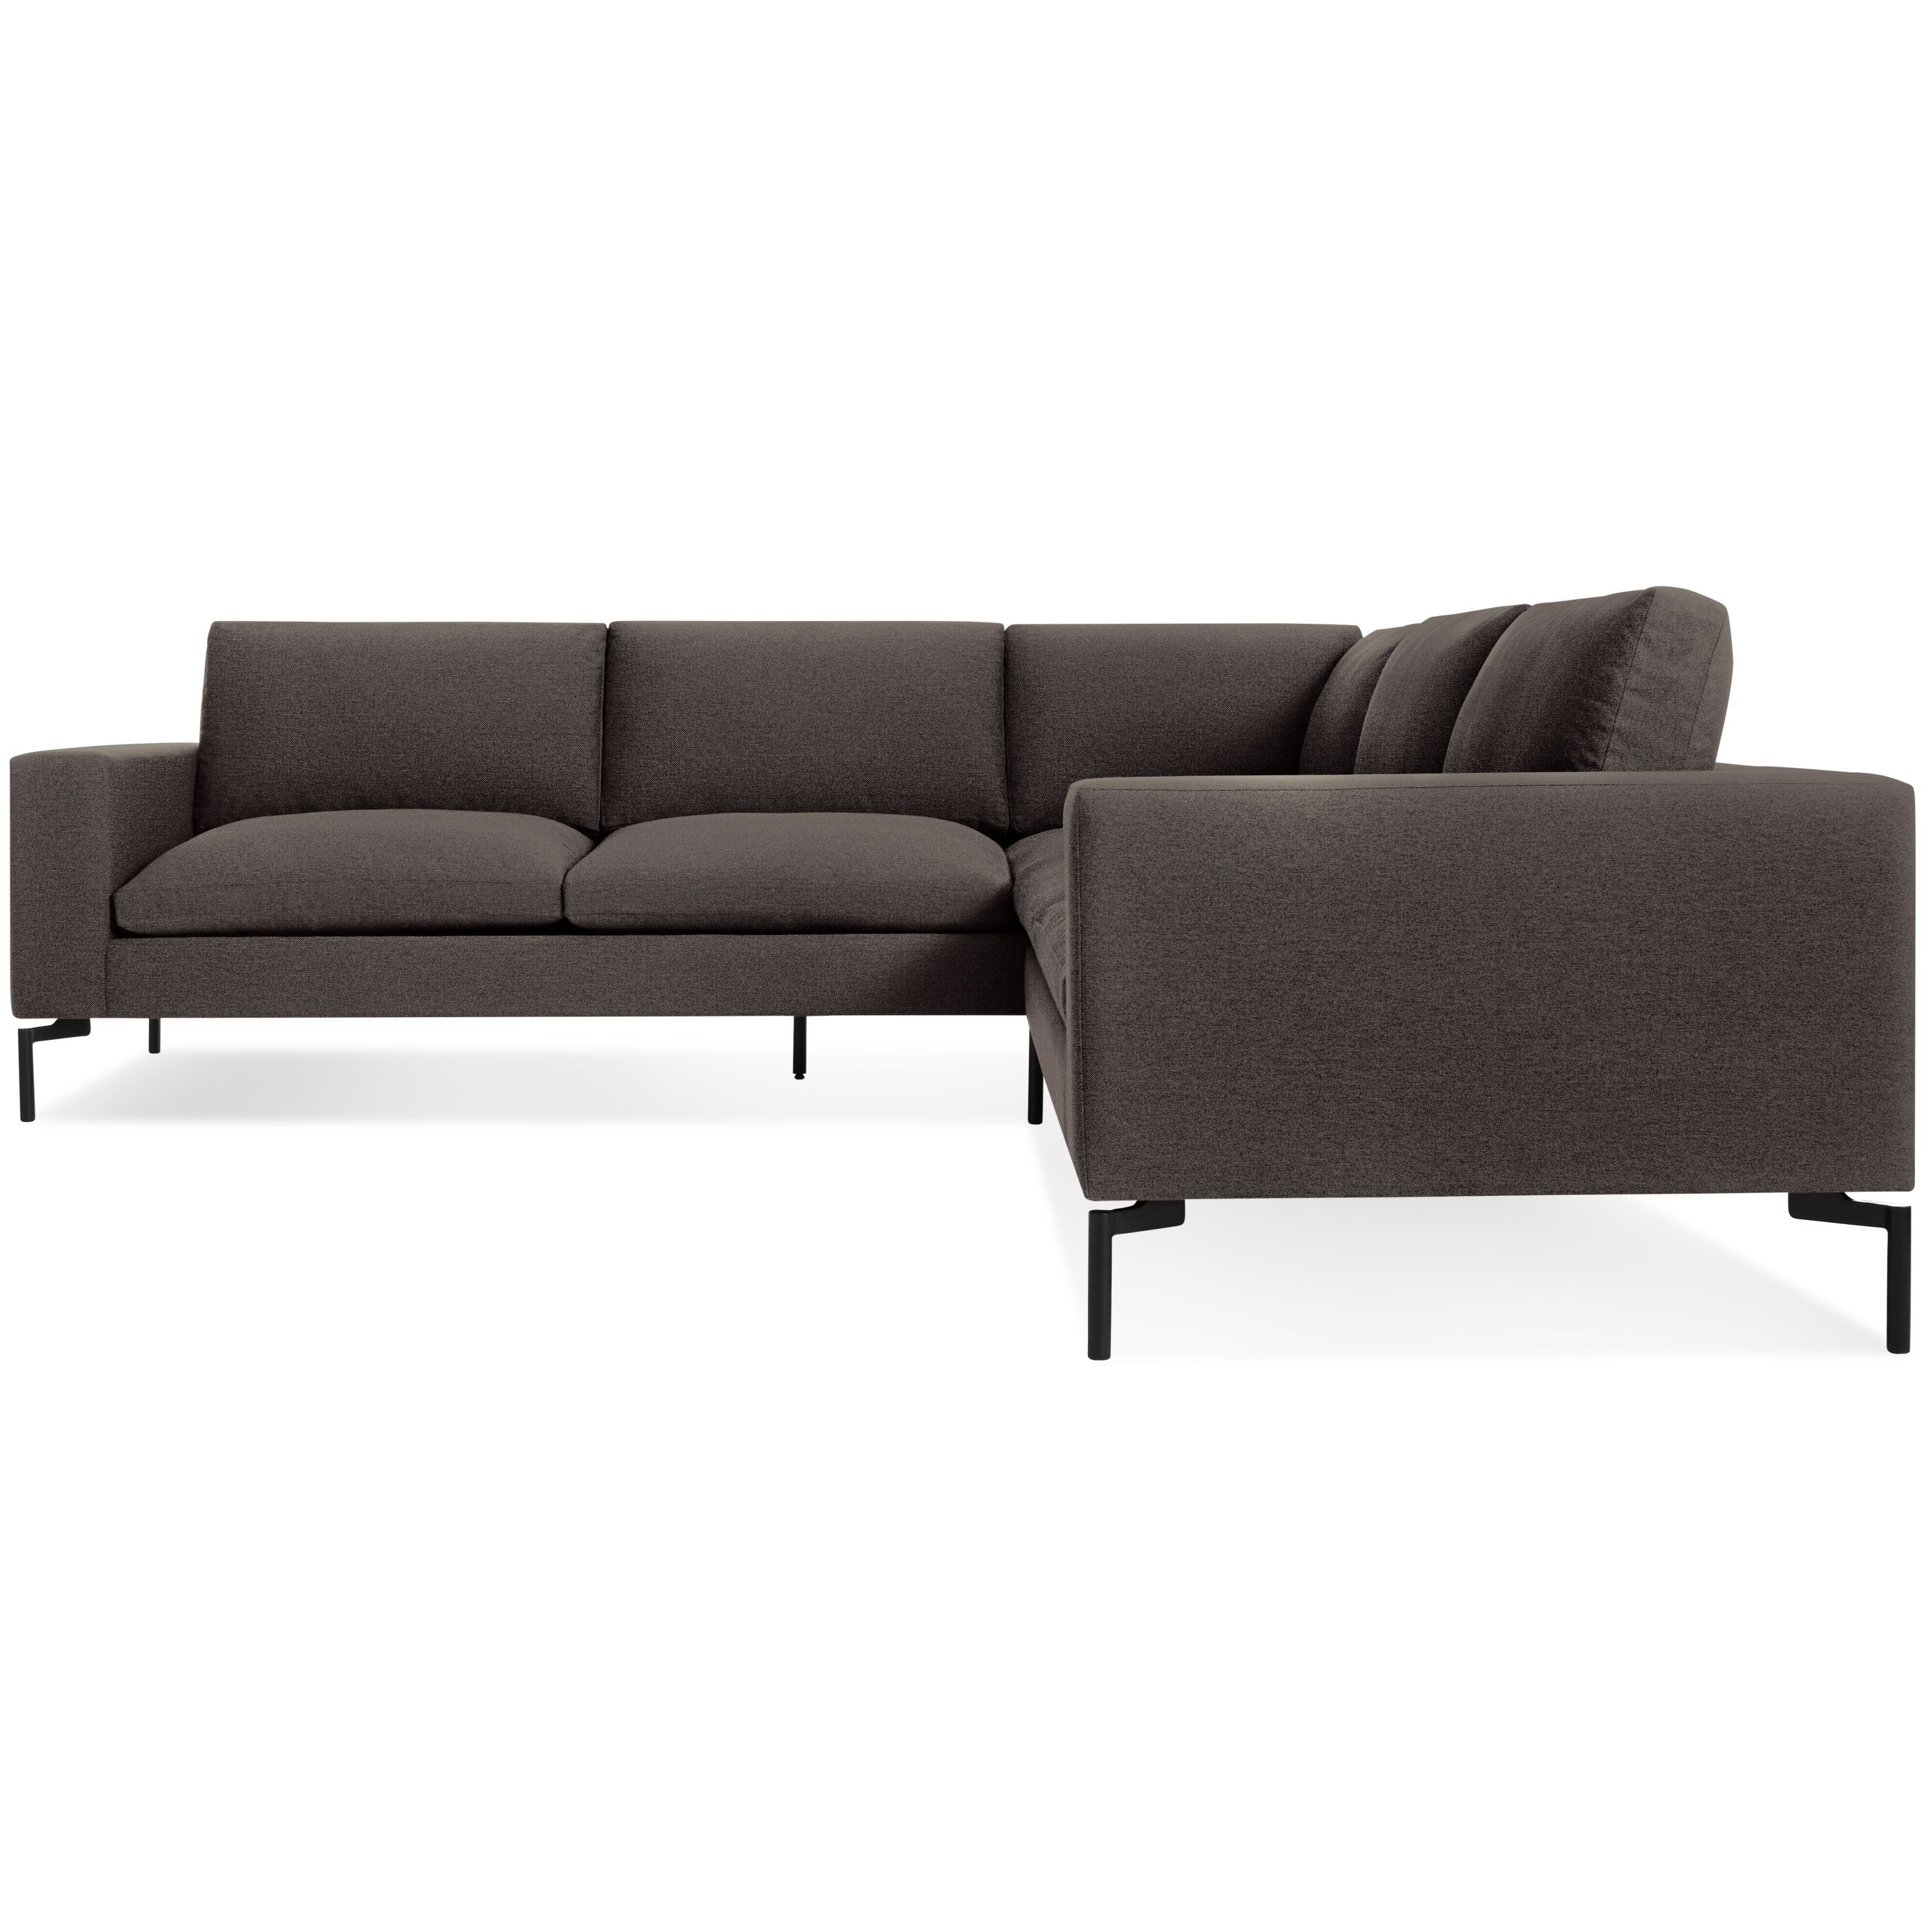 Newest New Standard Small Sectional Sofa – Modern Sofas (View 5 of 15)